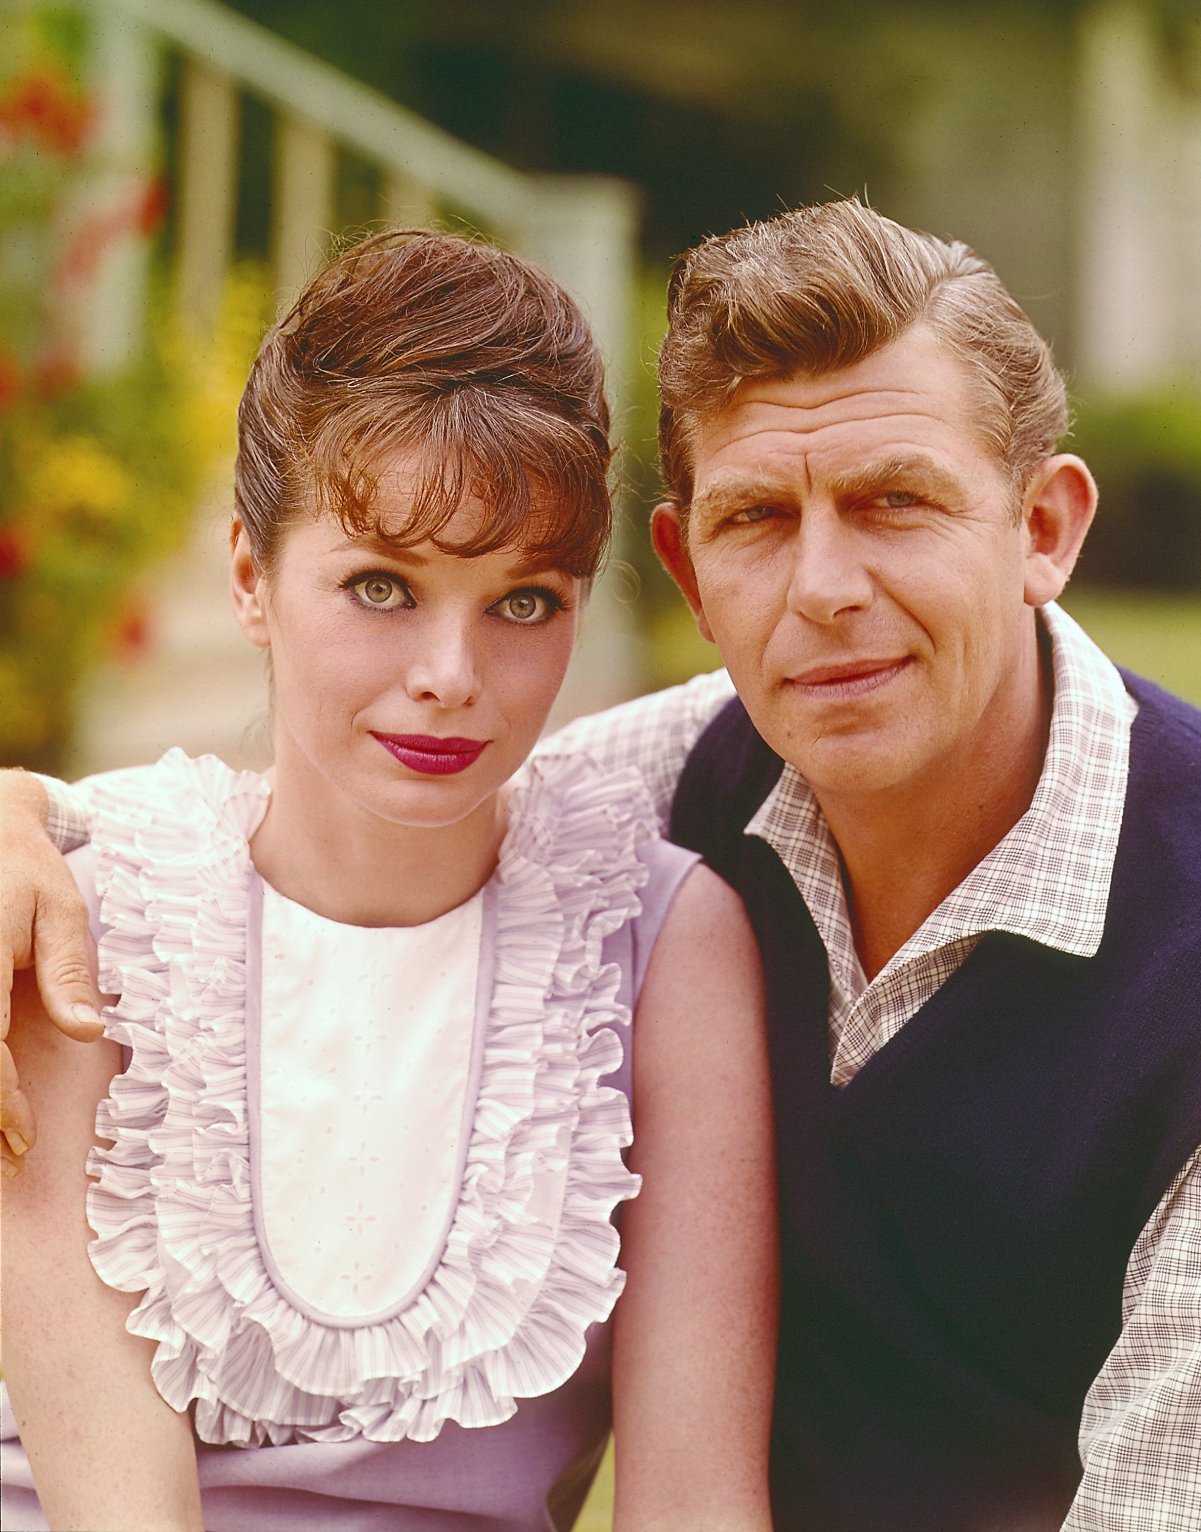 Andy Griffith, left, with Helen Crump actor Aneta Corsaut